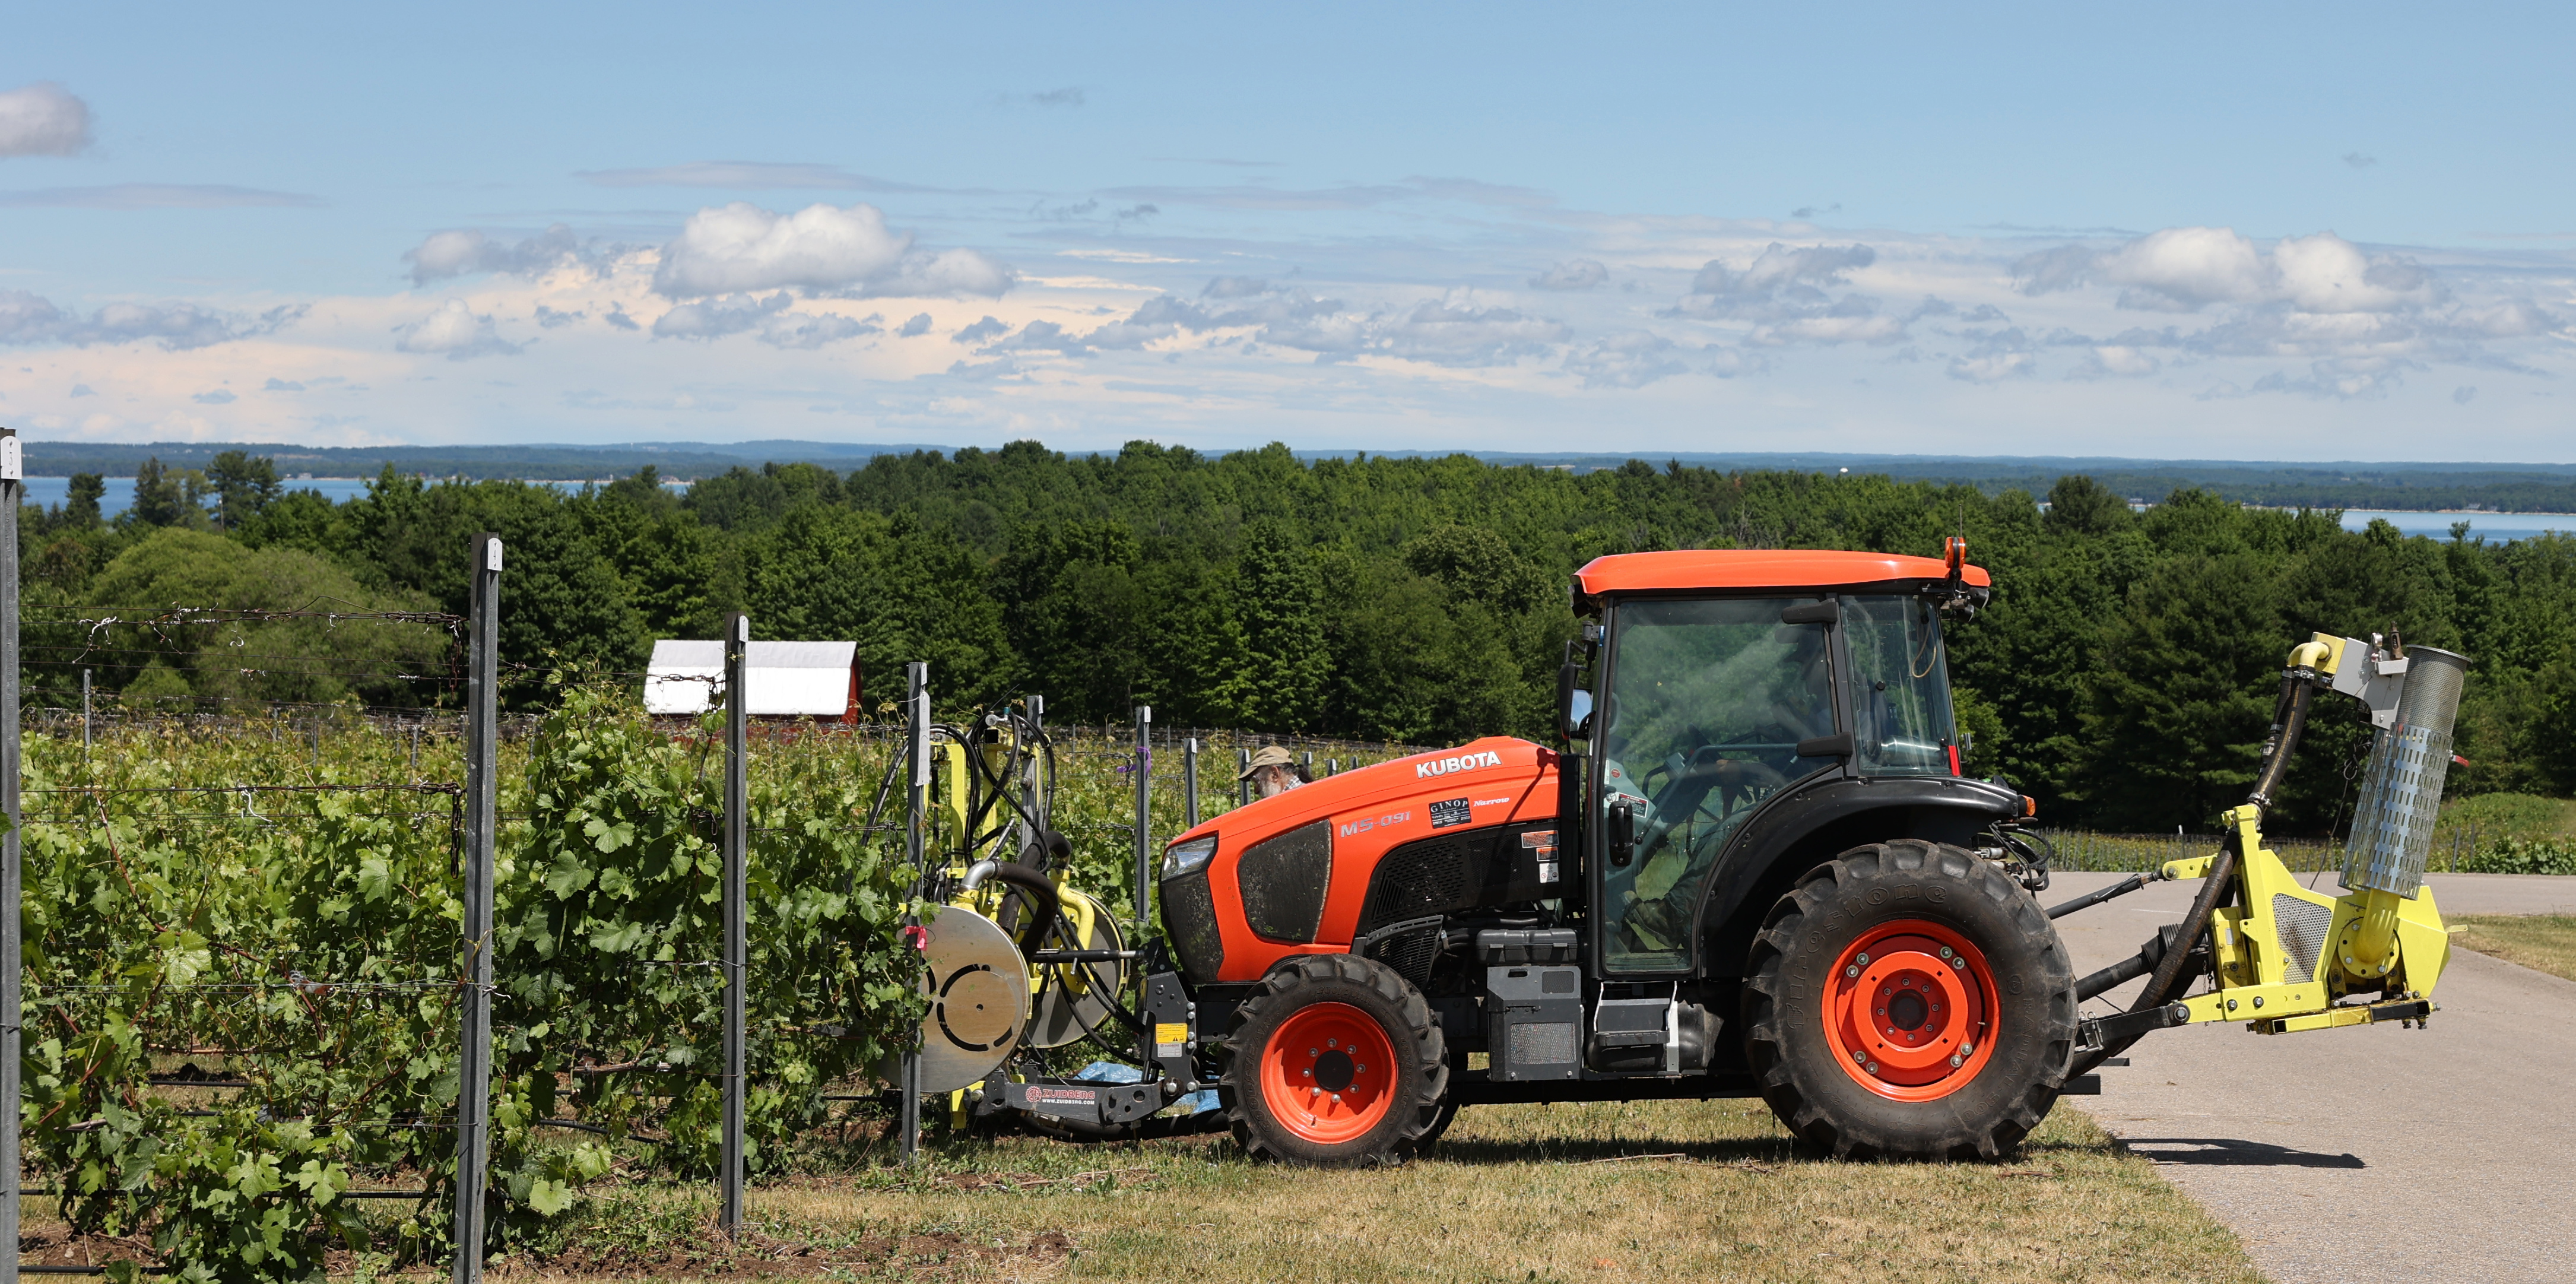 Tractor in vineyard removing leaves